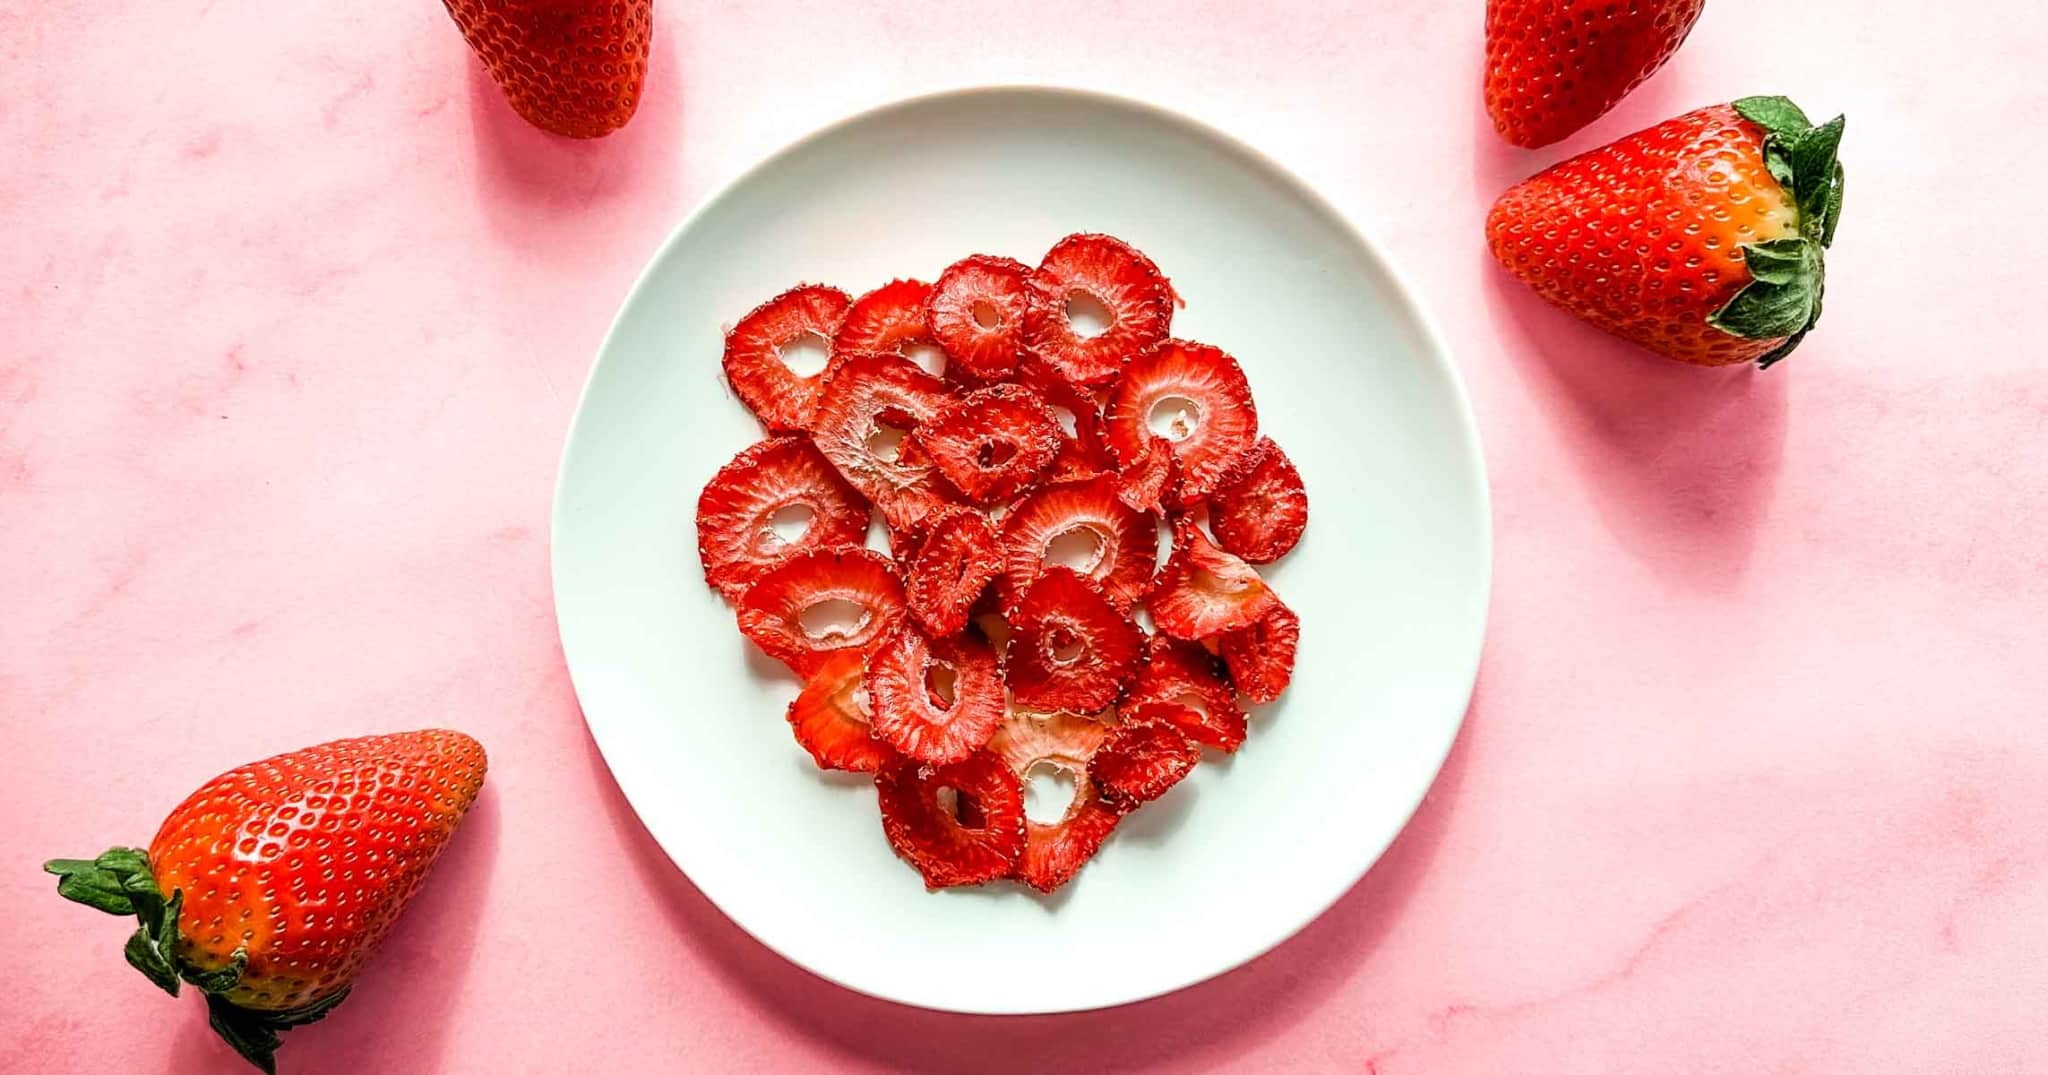 Dried sliced strawberries on a white plate with fresh strawberries around on a pink table.